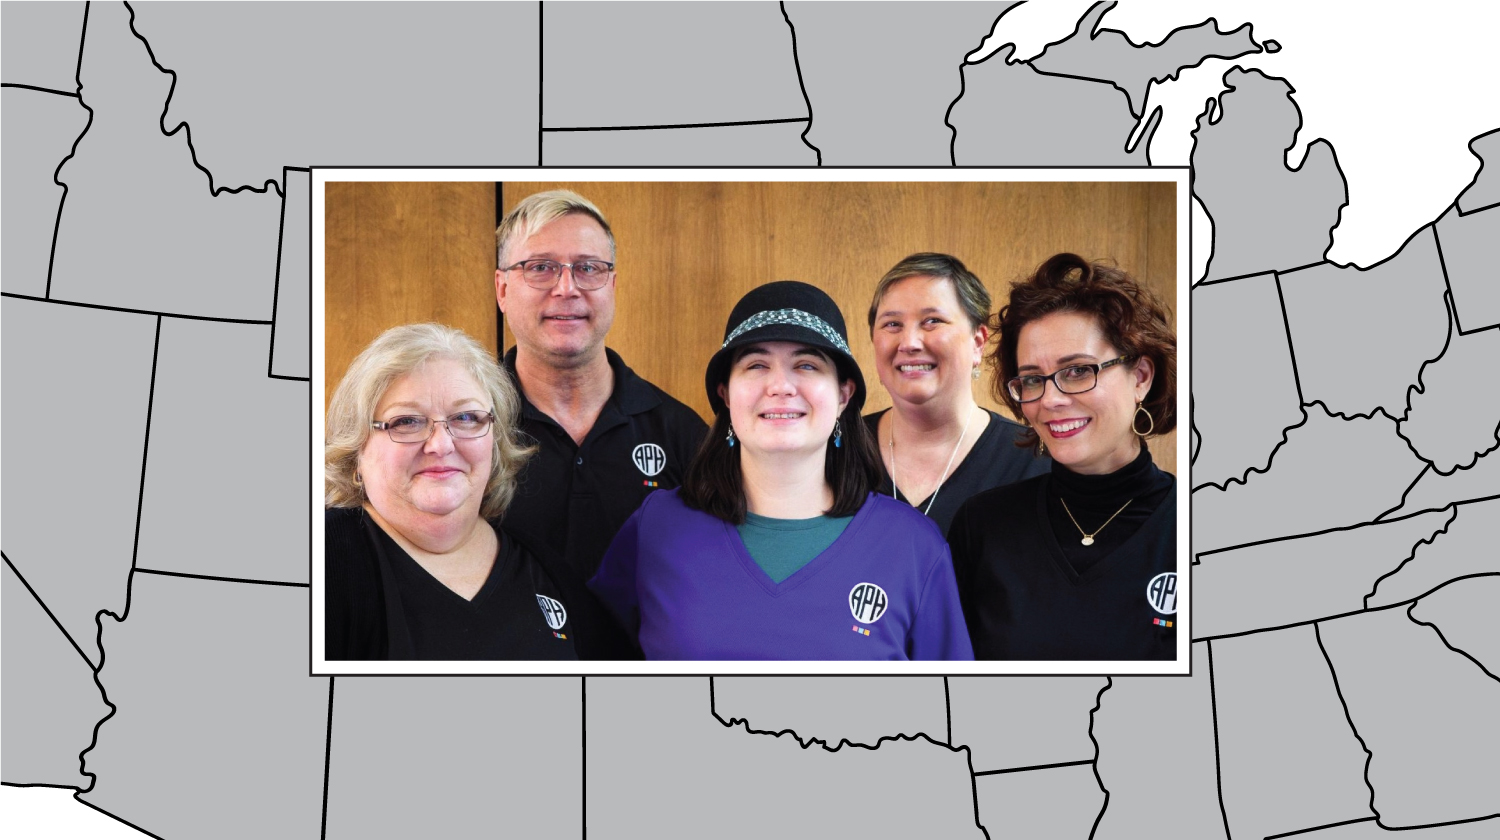 Group photo of Outreach team. From left to right; Scott Hegle , Cindy Amback, Jeff Schwarz, Leslie Weilbacher, Leanne Grillot, Amy Campbell.